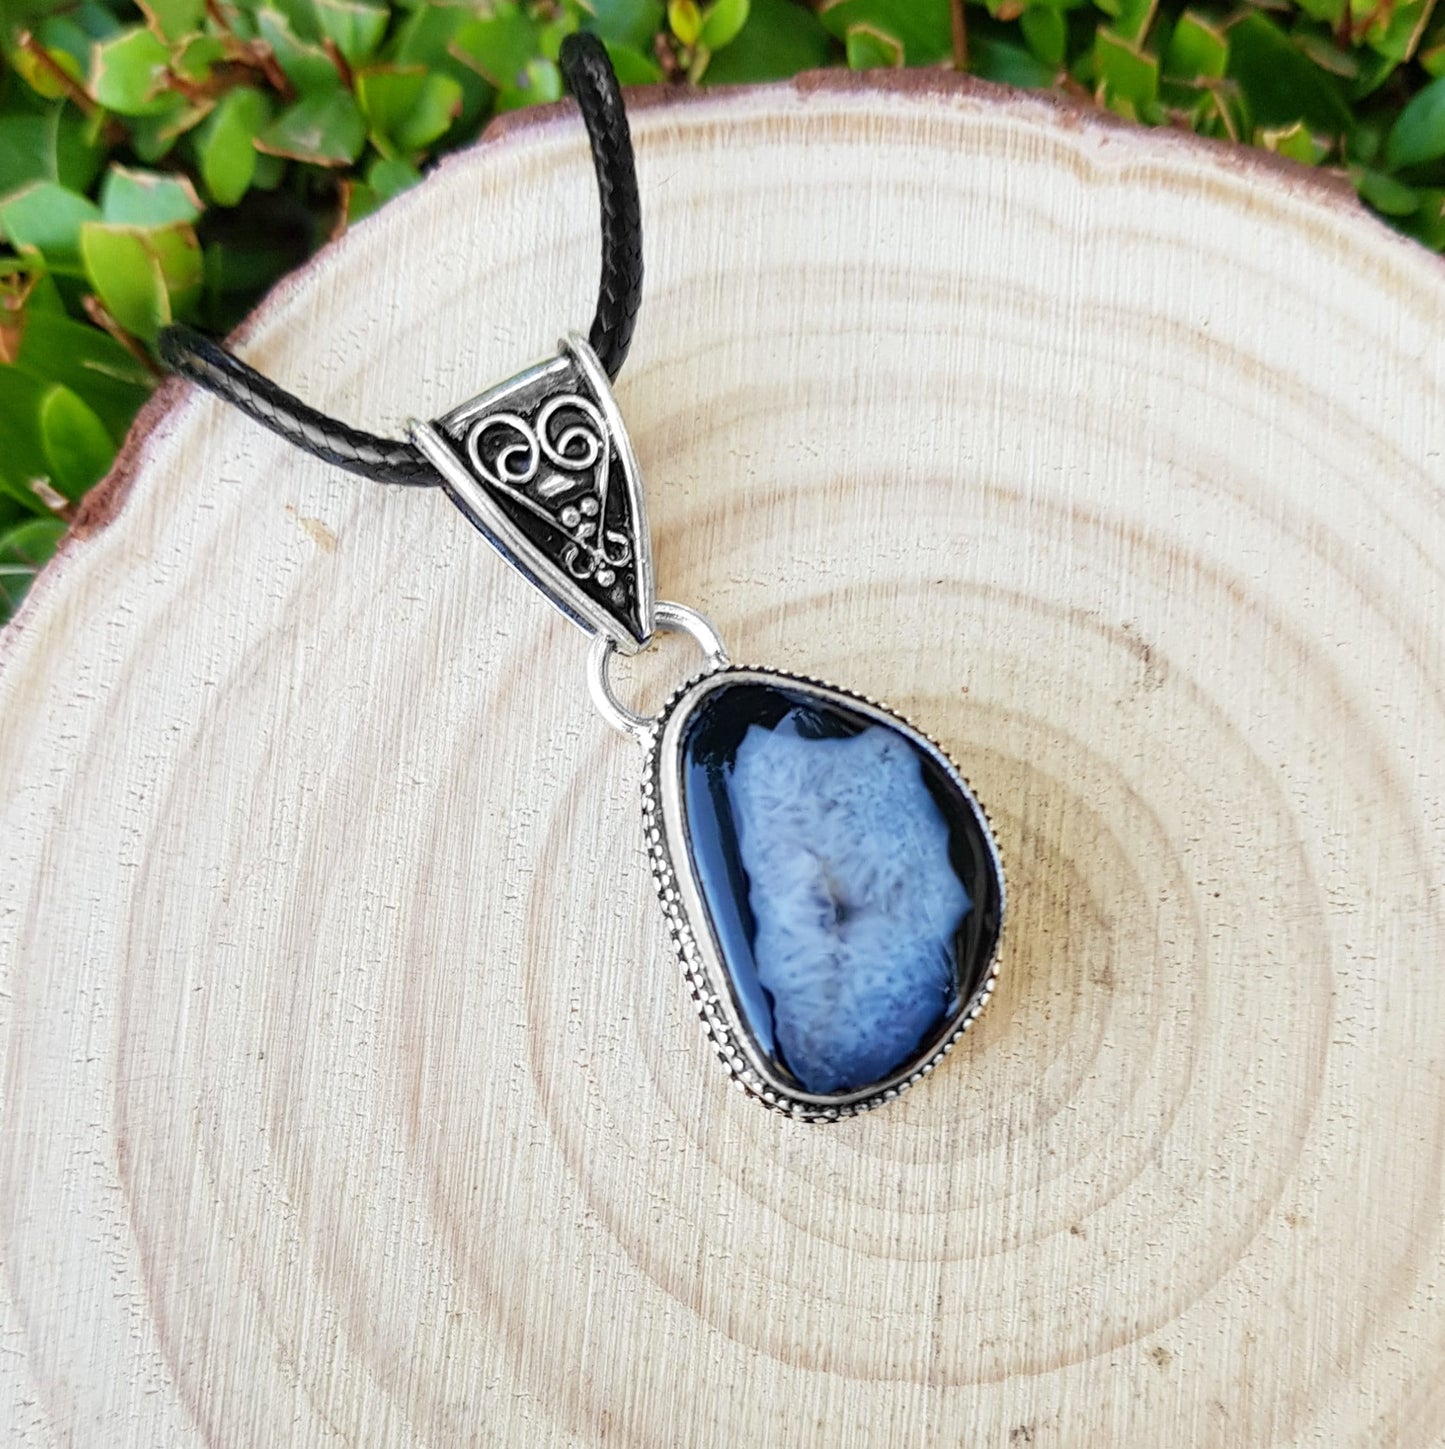 Small Black Solar Agate Pendant Statement Necklace In Sterling Silver Boho Gemstone Pendant One Of A Kind Jewelry